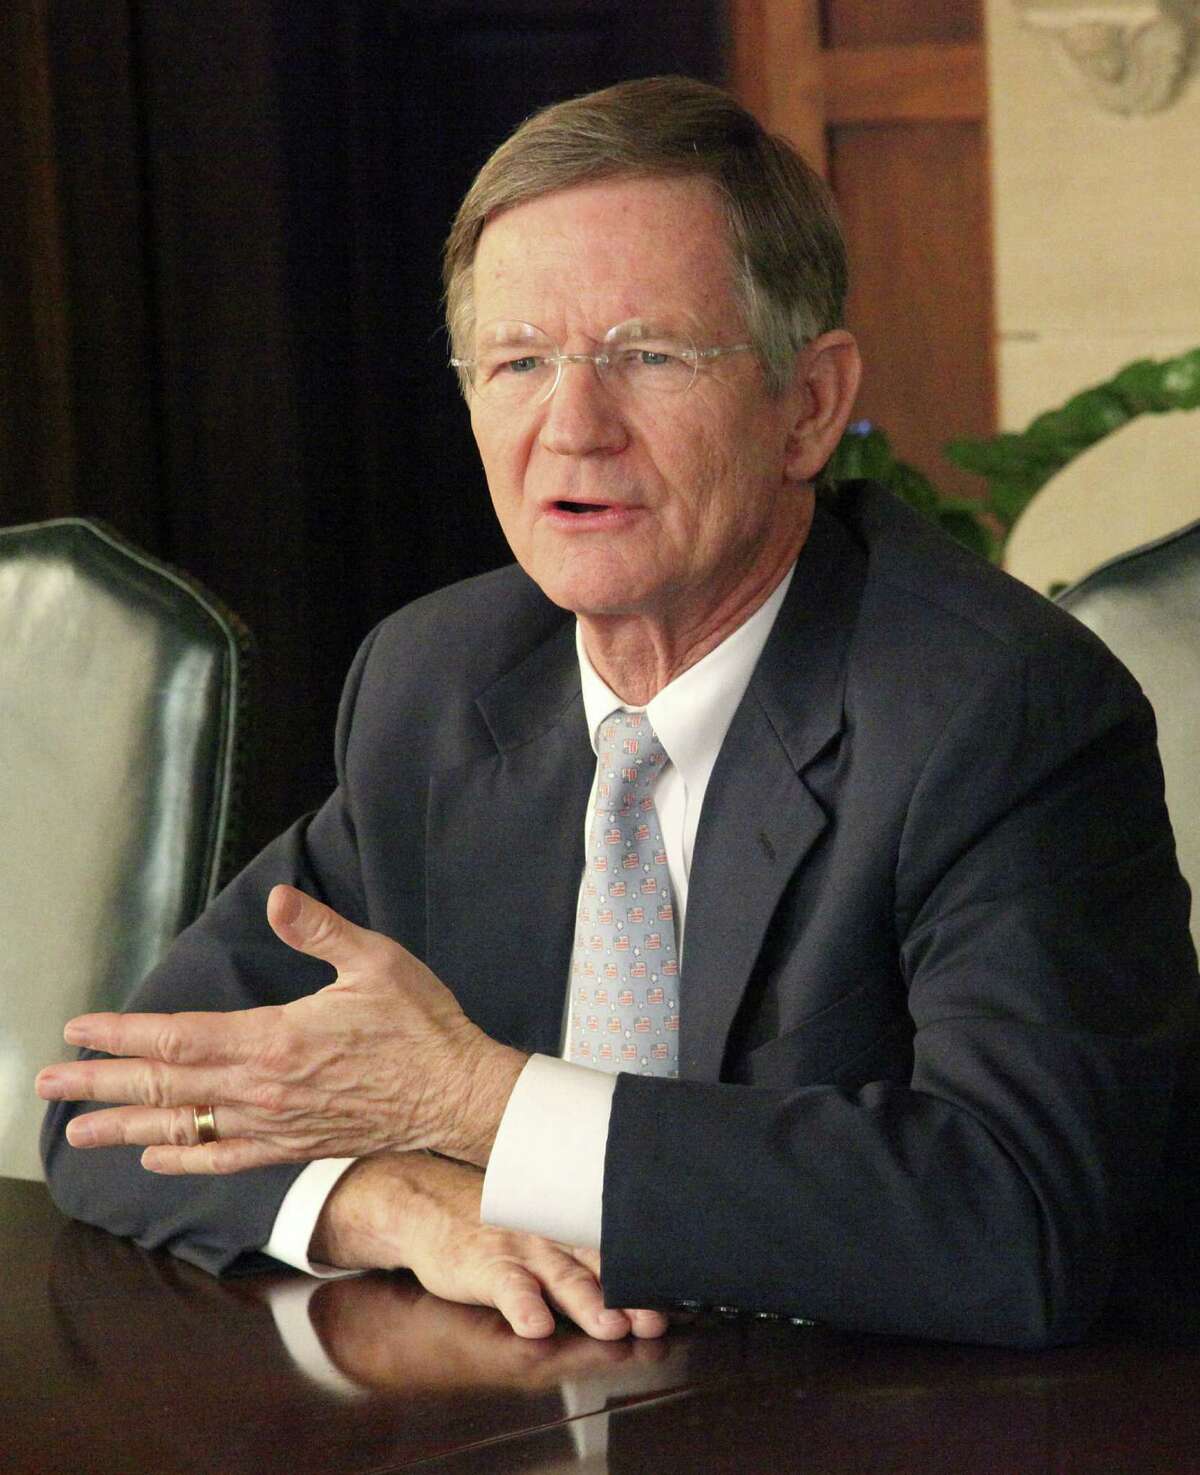 U.S. Rep. Lamar Smith says he expects House Republicans to put forth a bill that offers legal status to some.